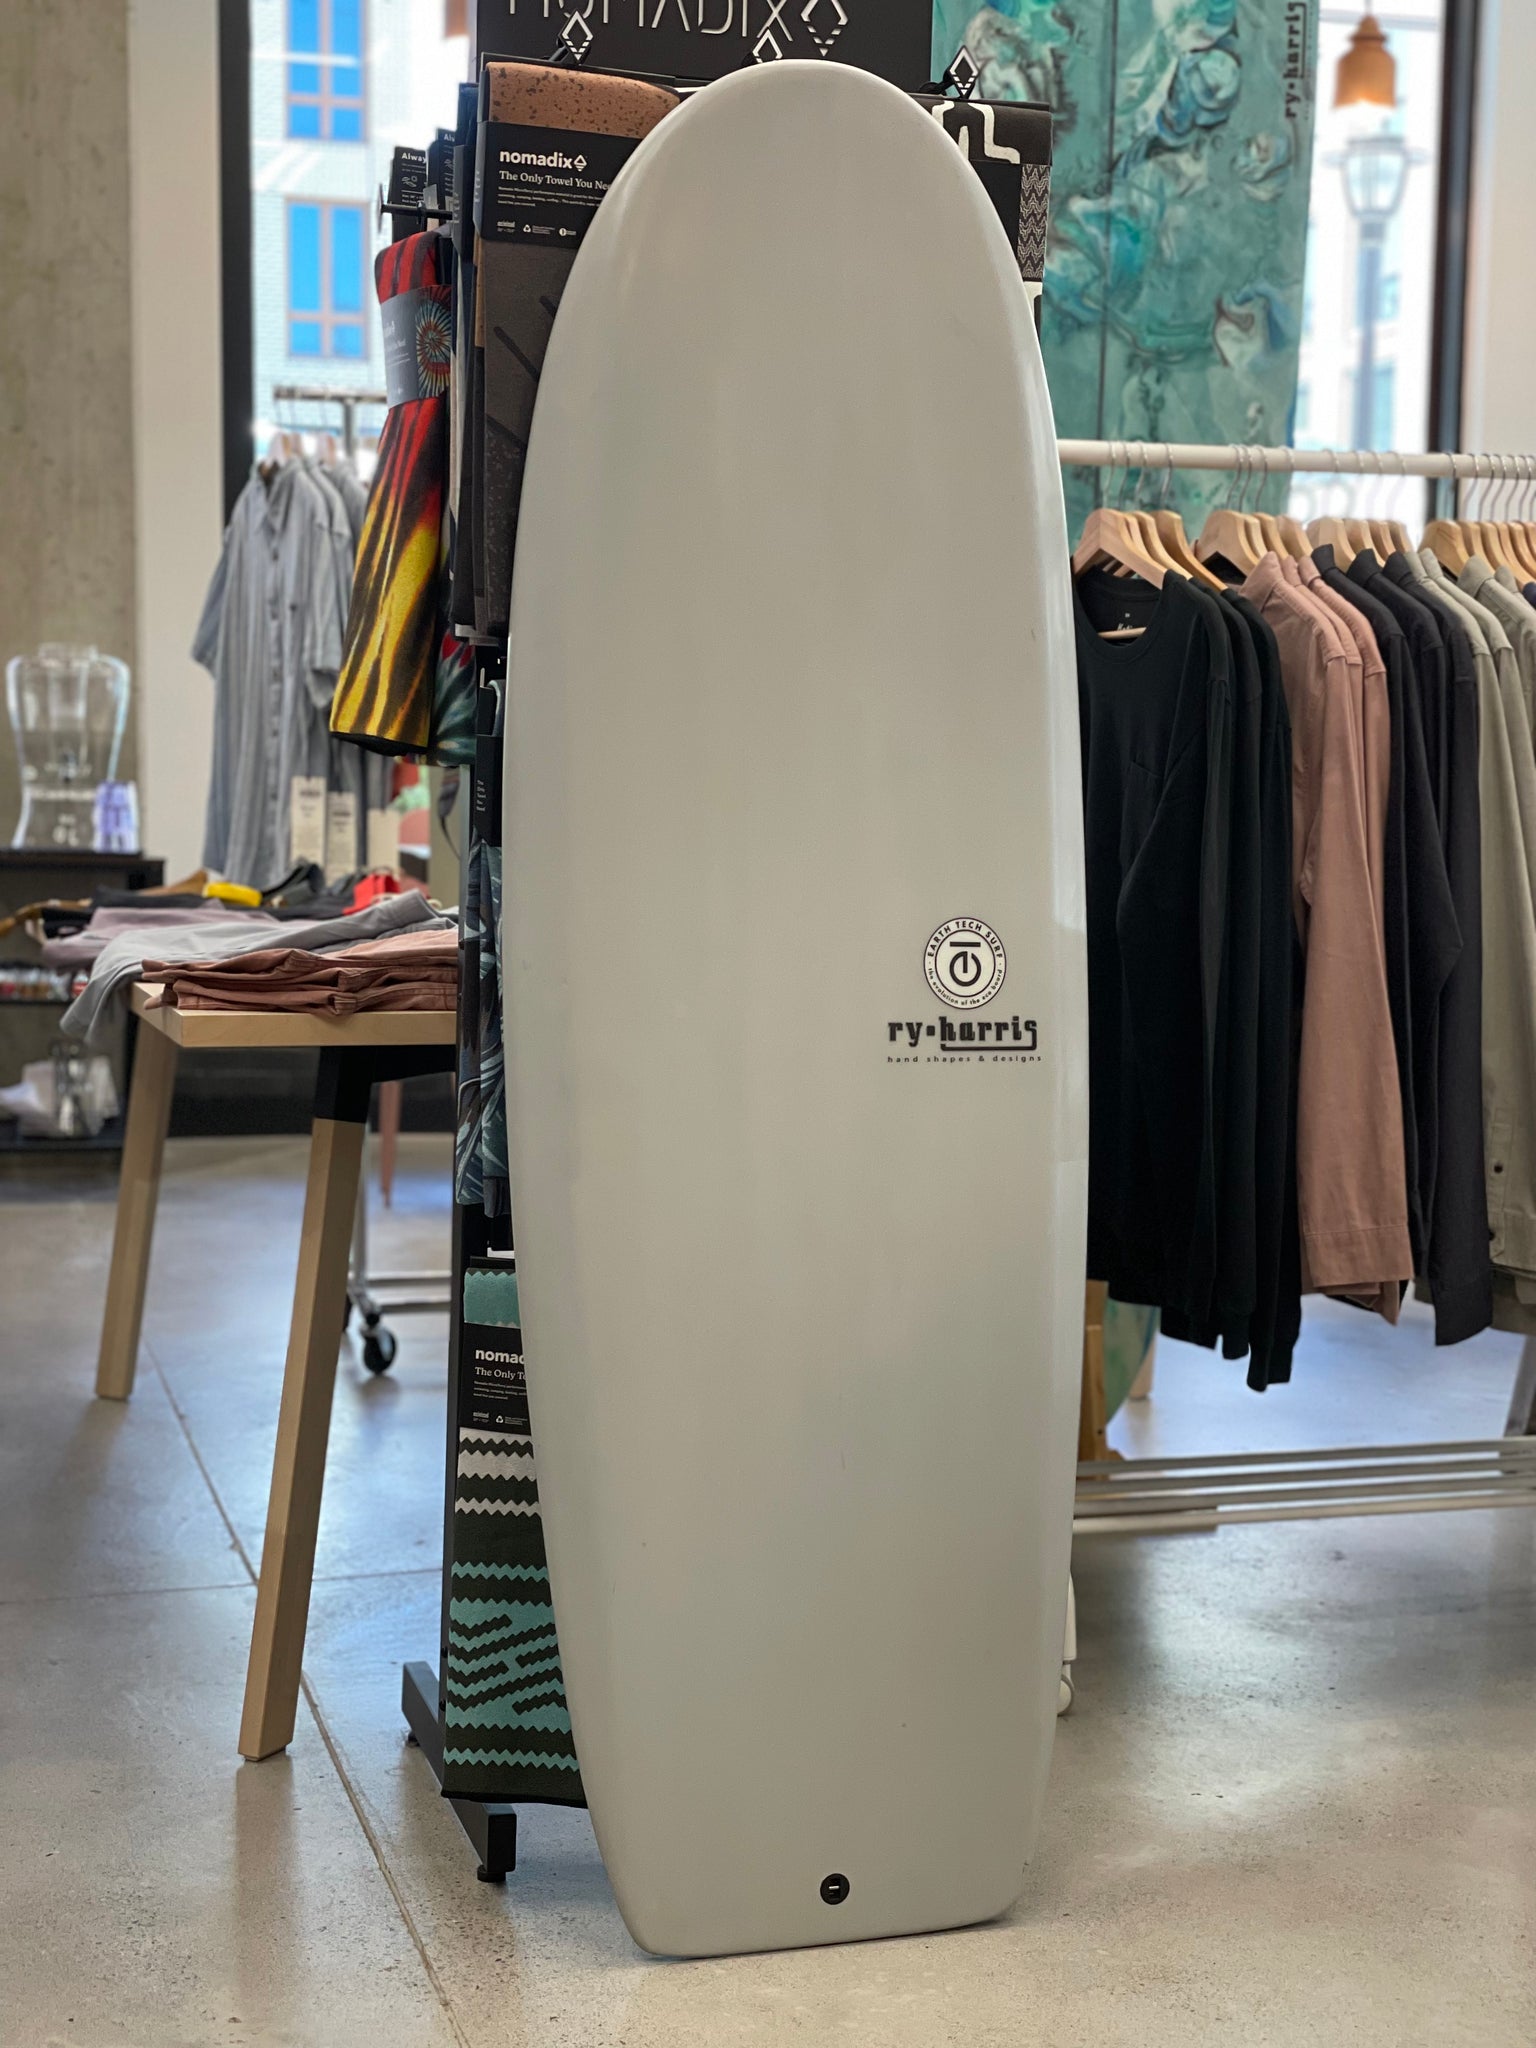 The MMS (Mighty Mini Simmons) - 5'2" - Gray